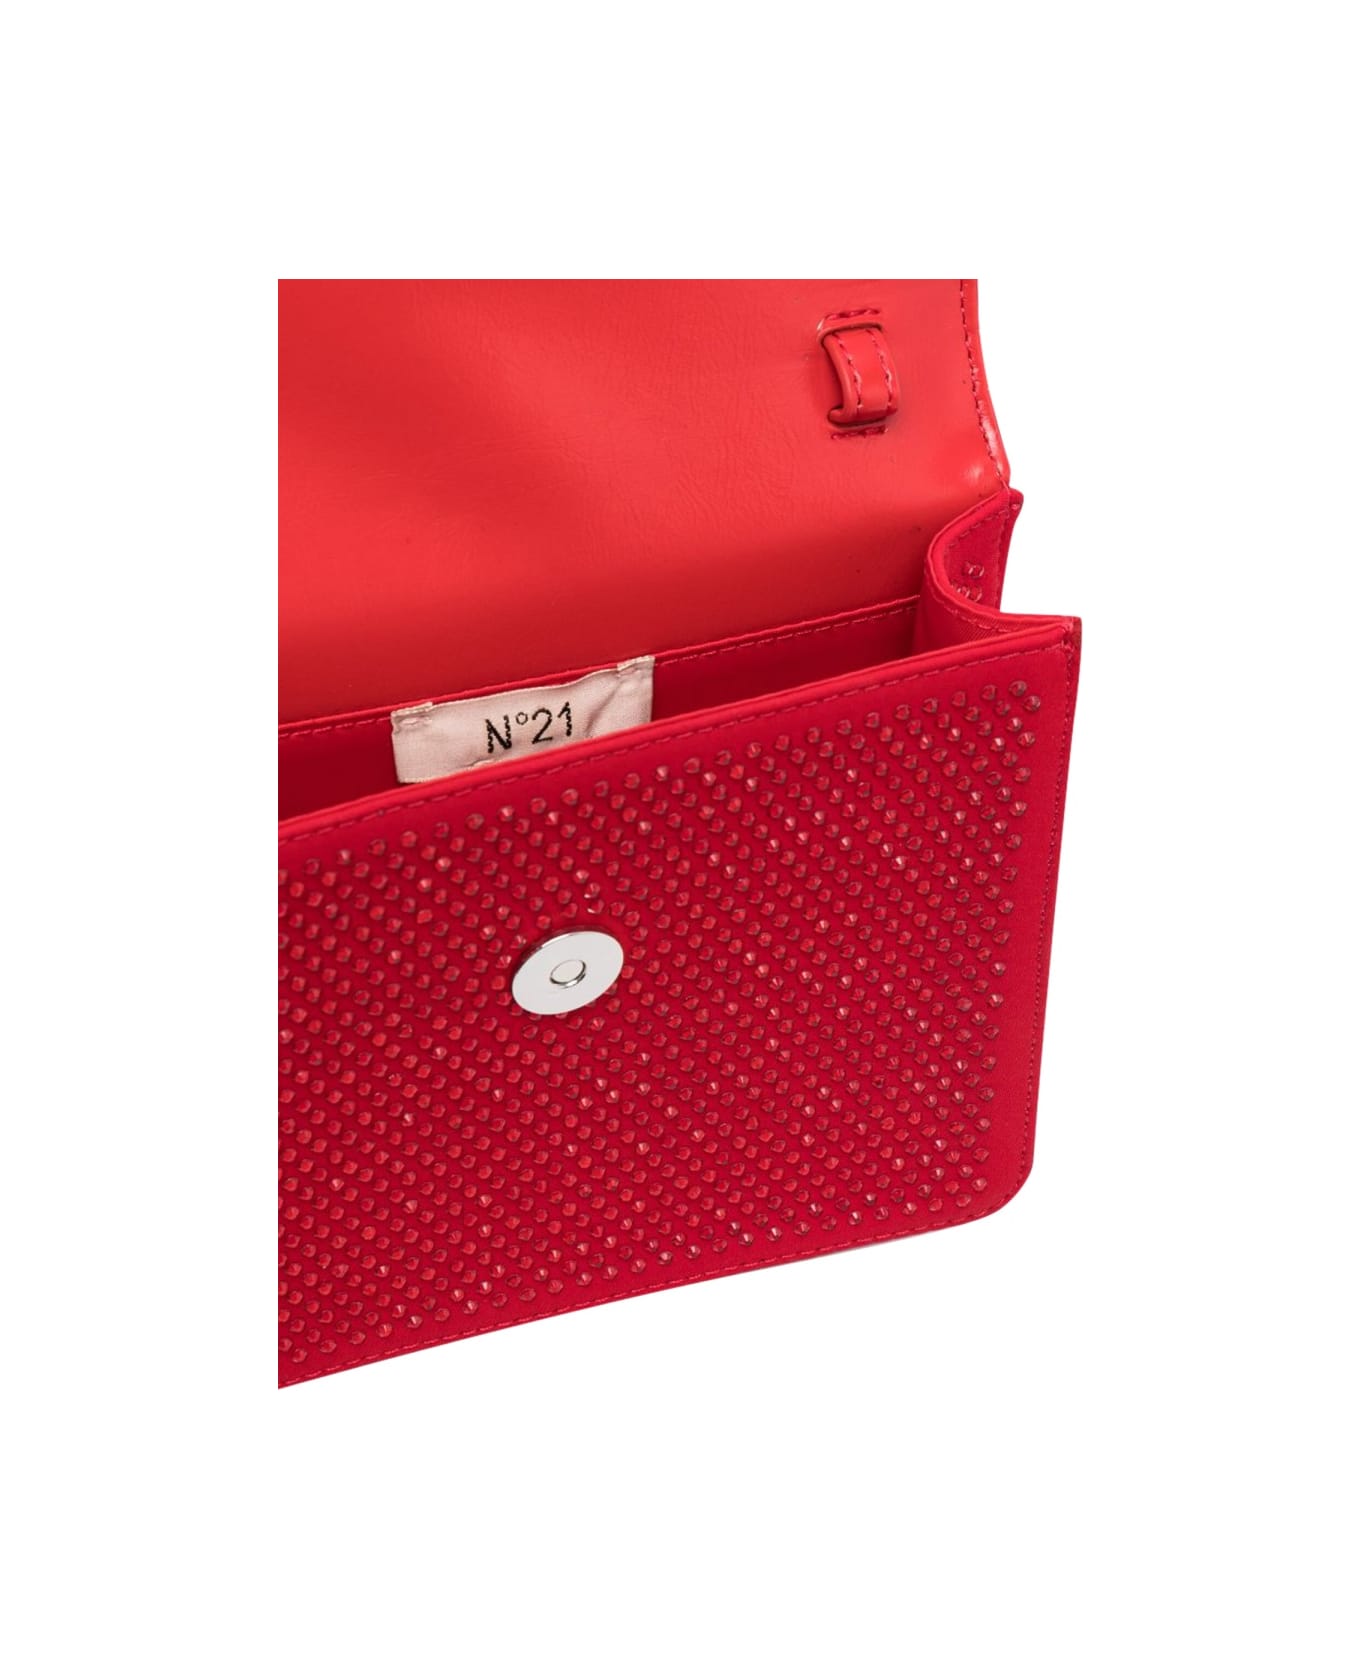 N.21 Pouch - RED